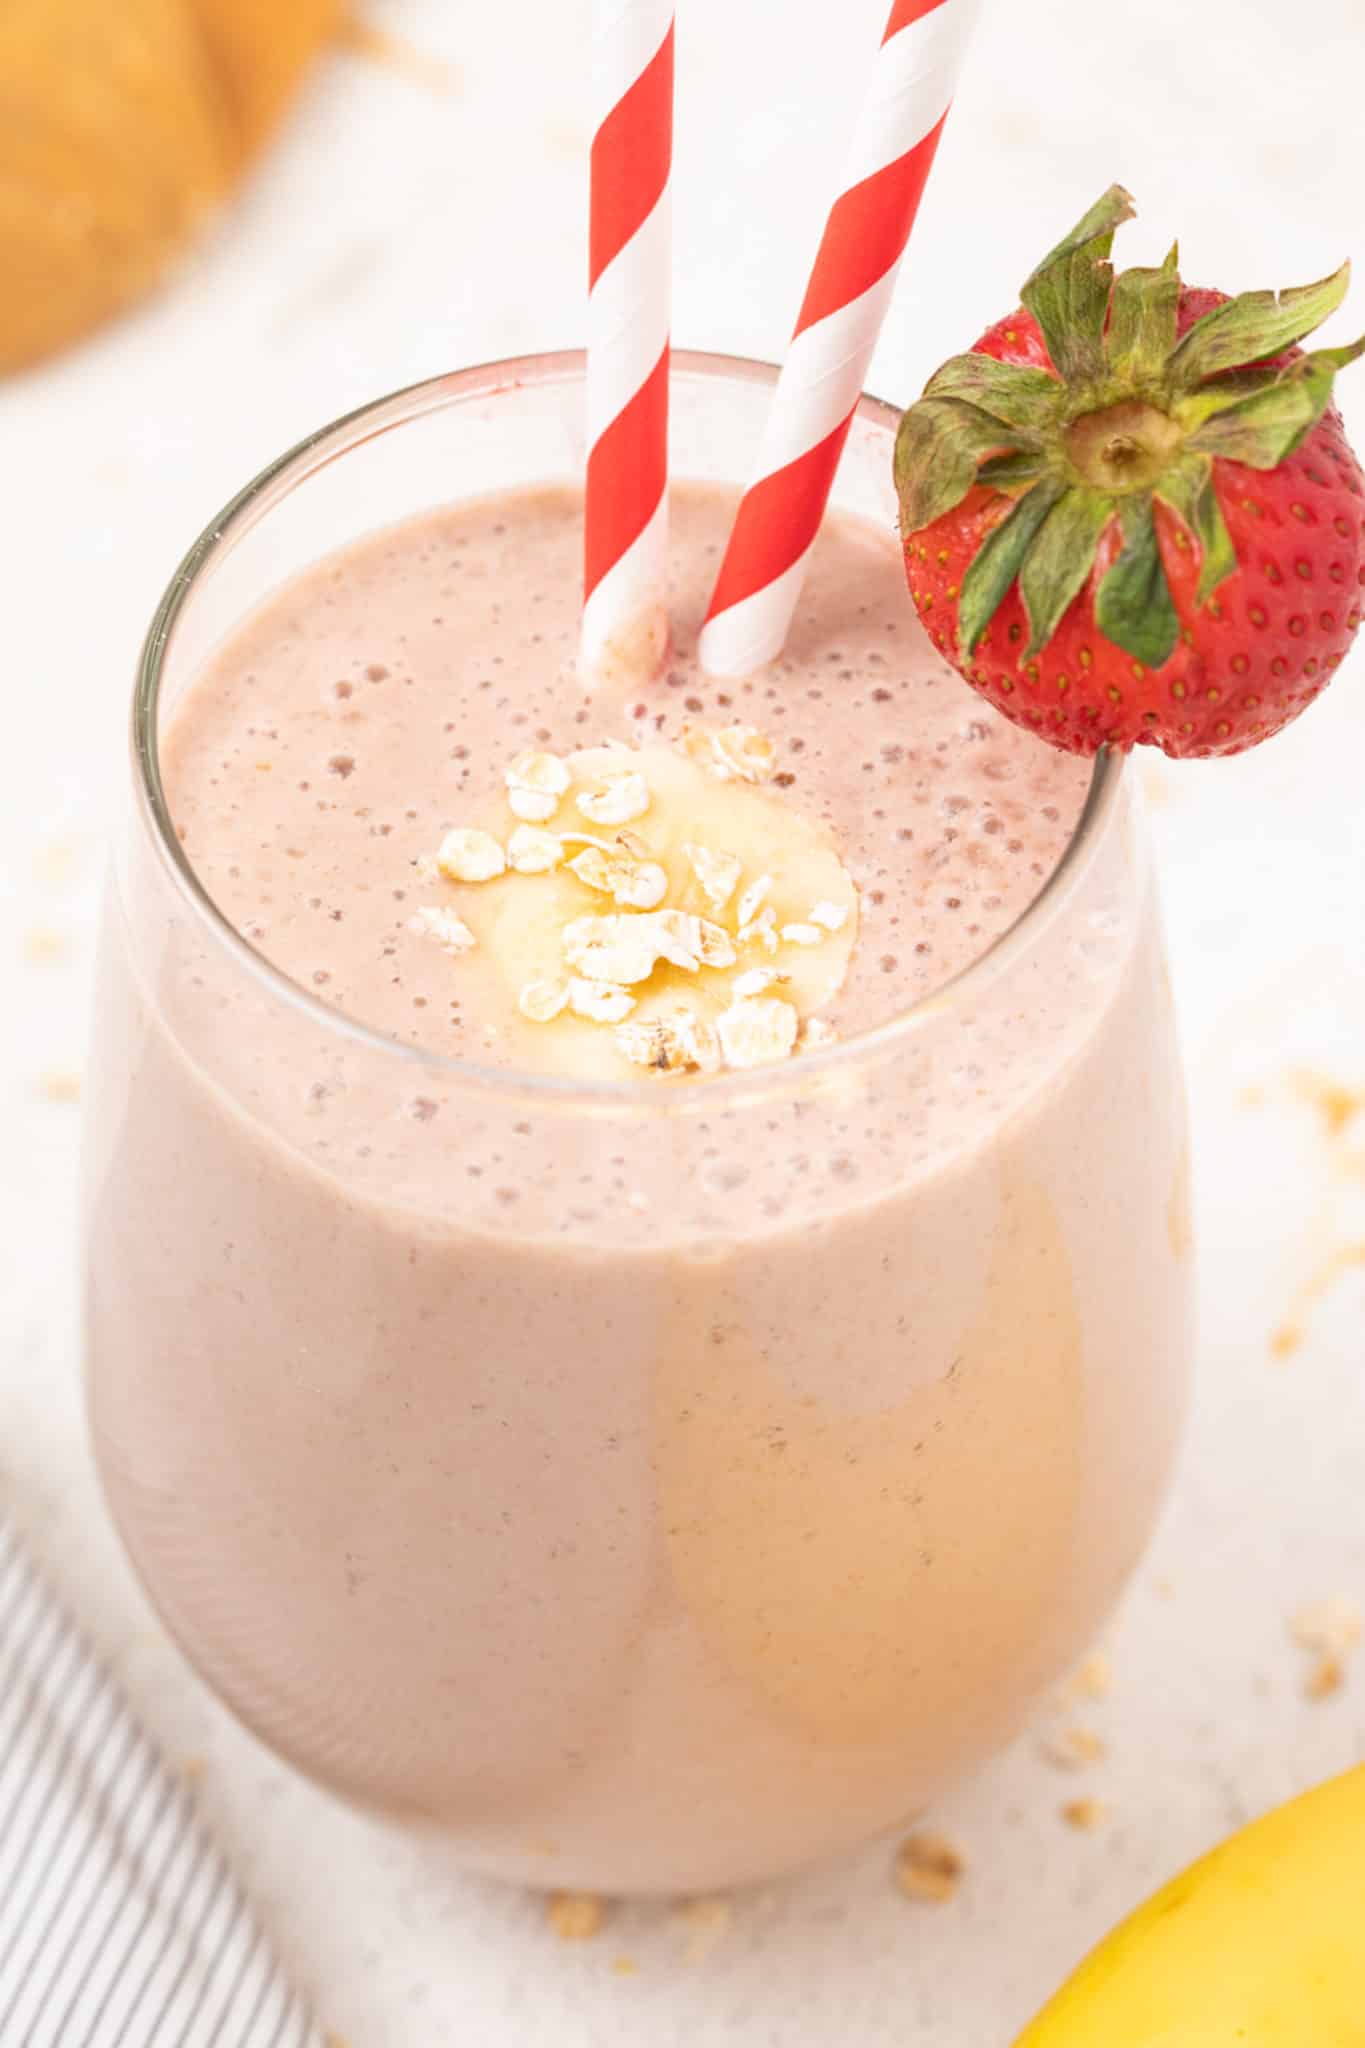 Oat milk strawberry banana smoothie served in a glass